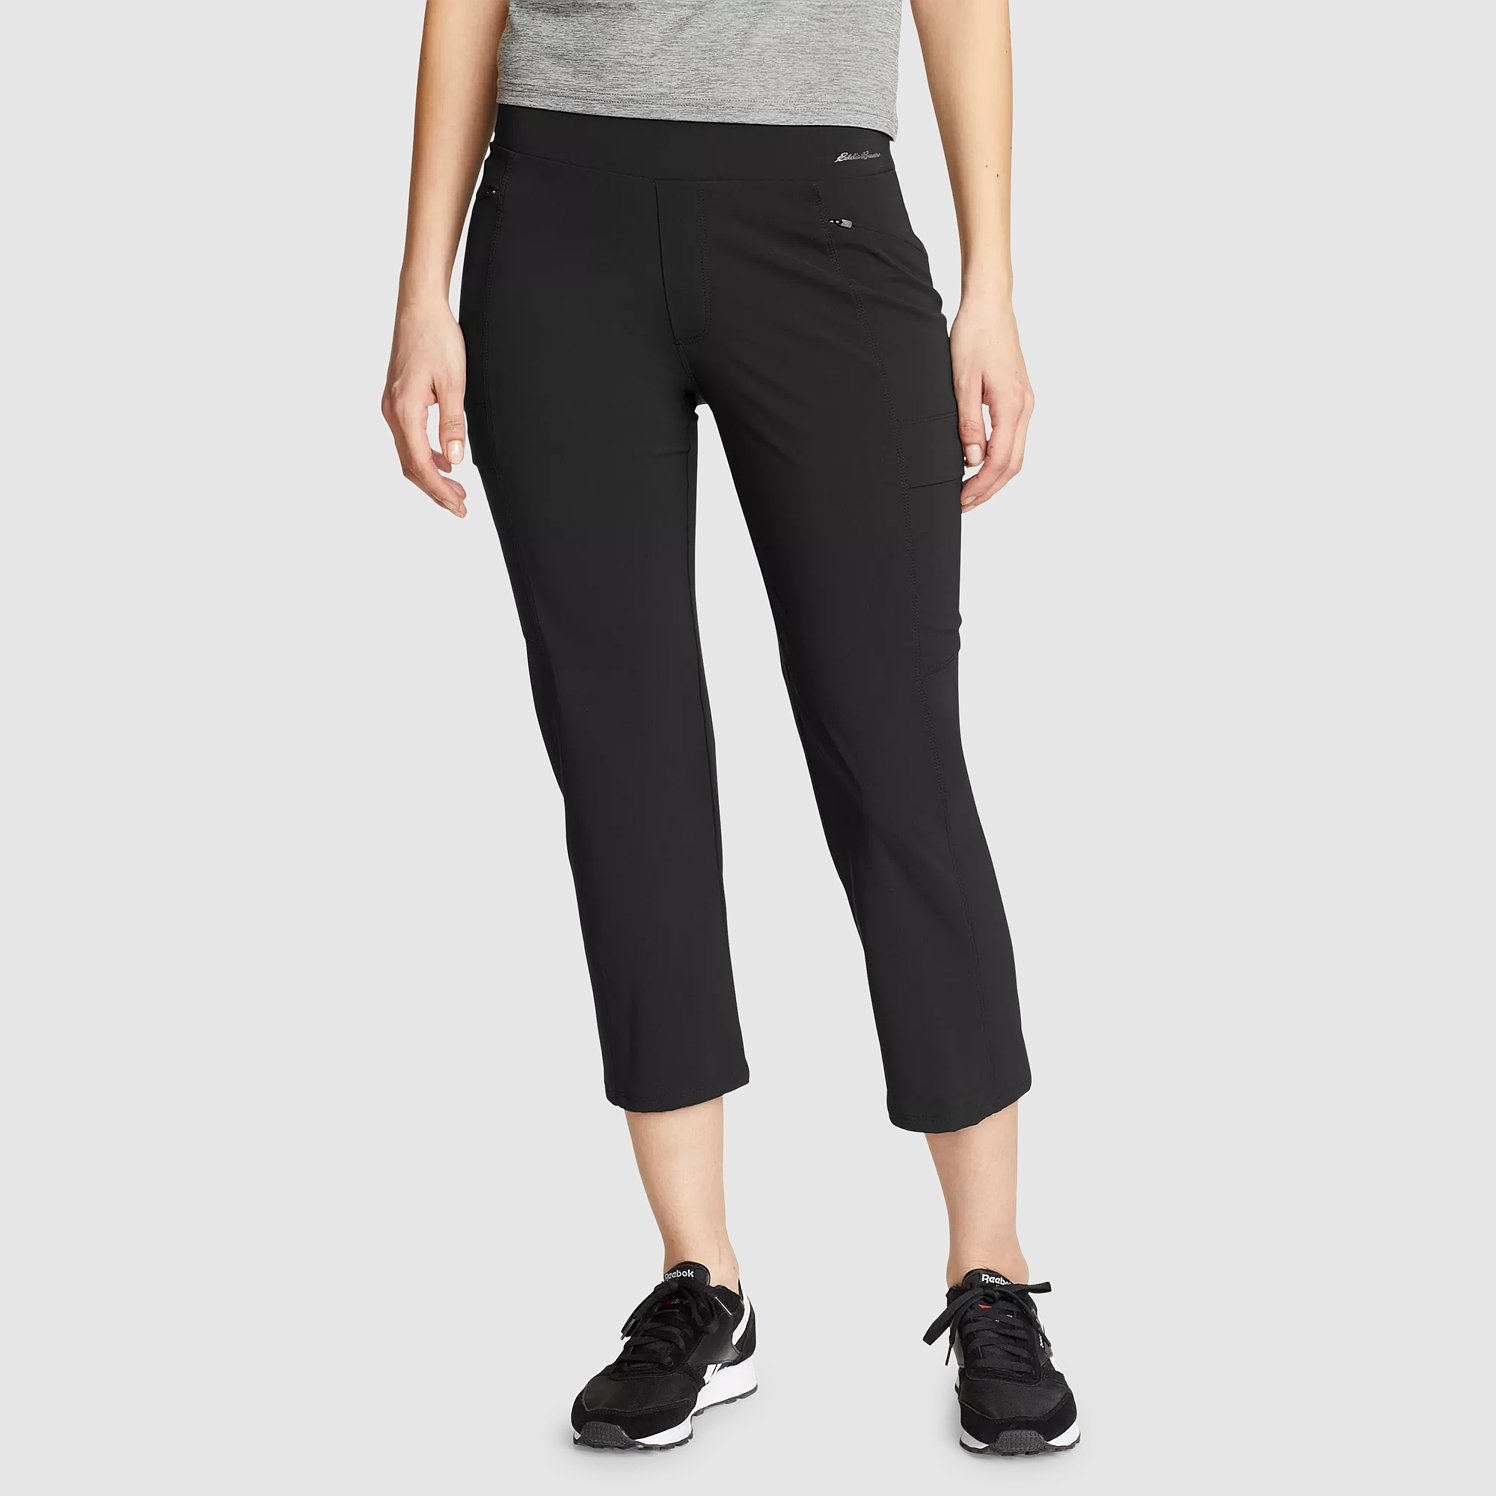 Eddie Bauer Ladies French Terry Capri - Various Colors and Sizes